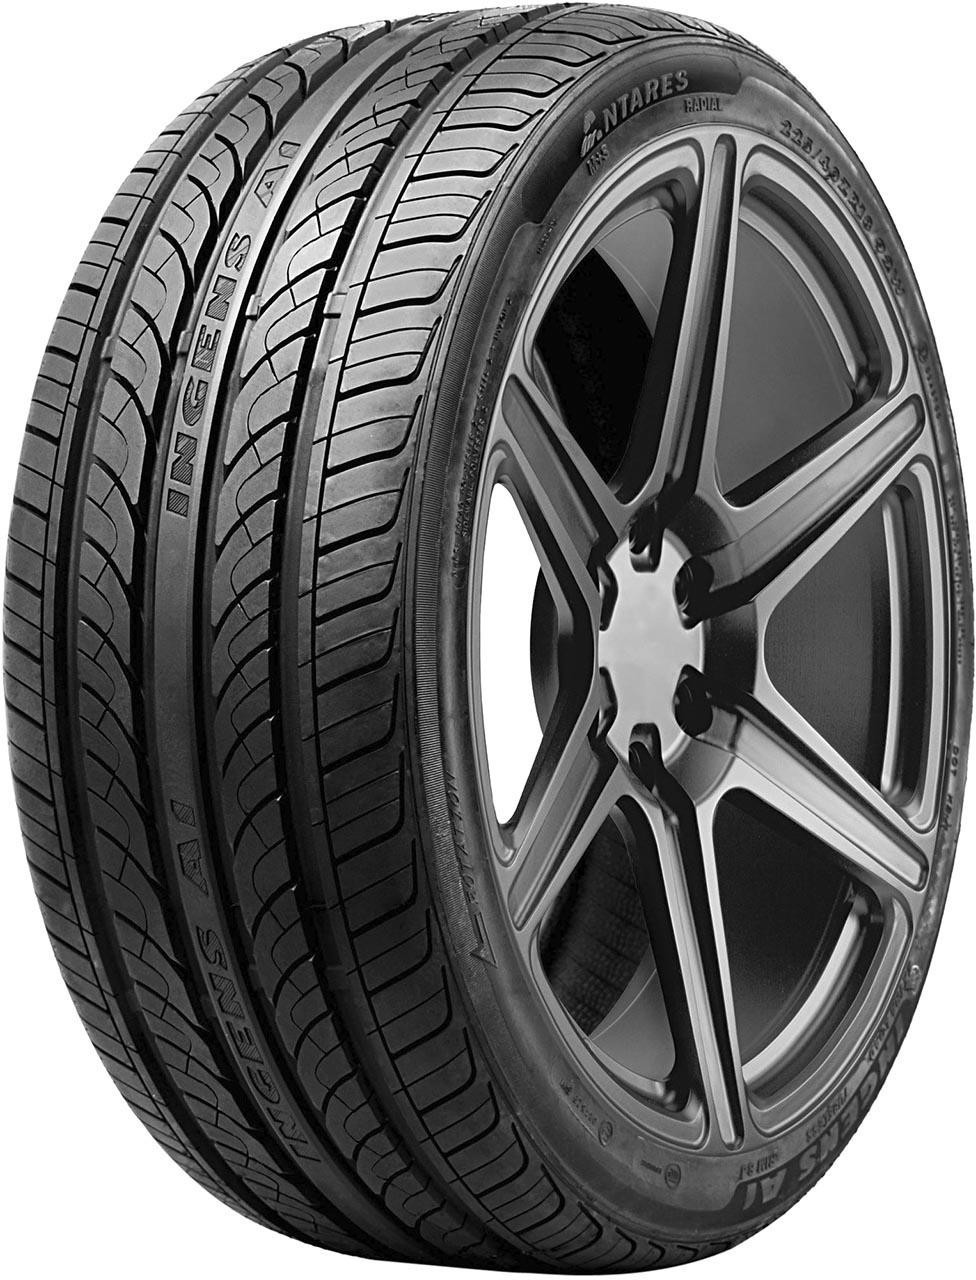 Antares Tires Ingens A1 205/45 R16 87W XL